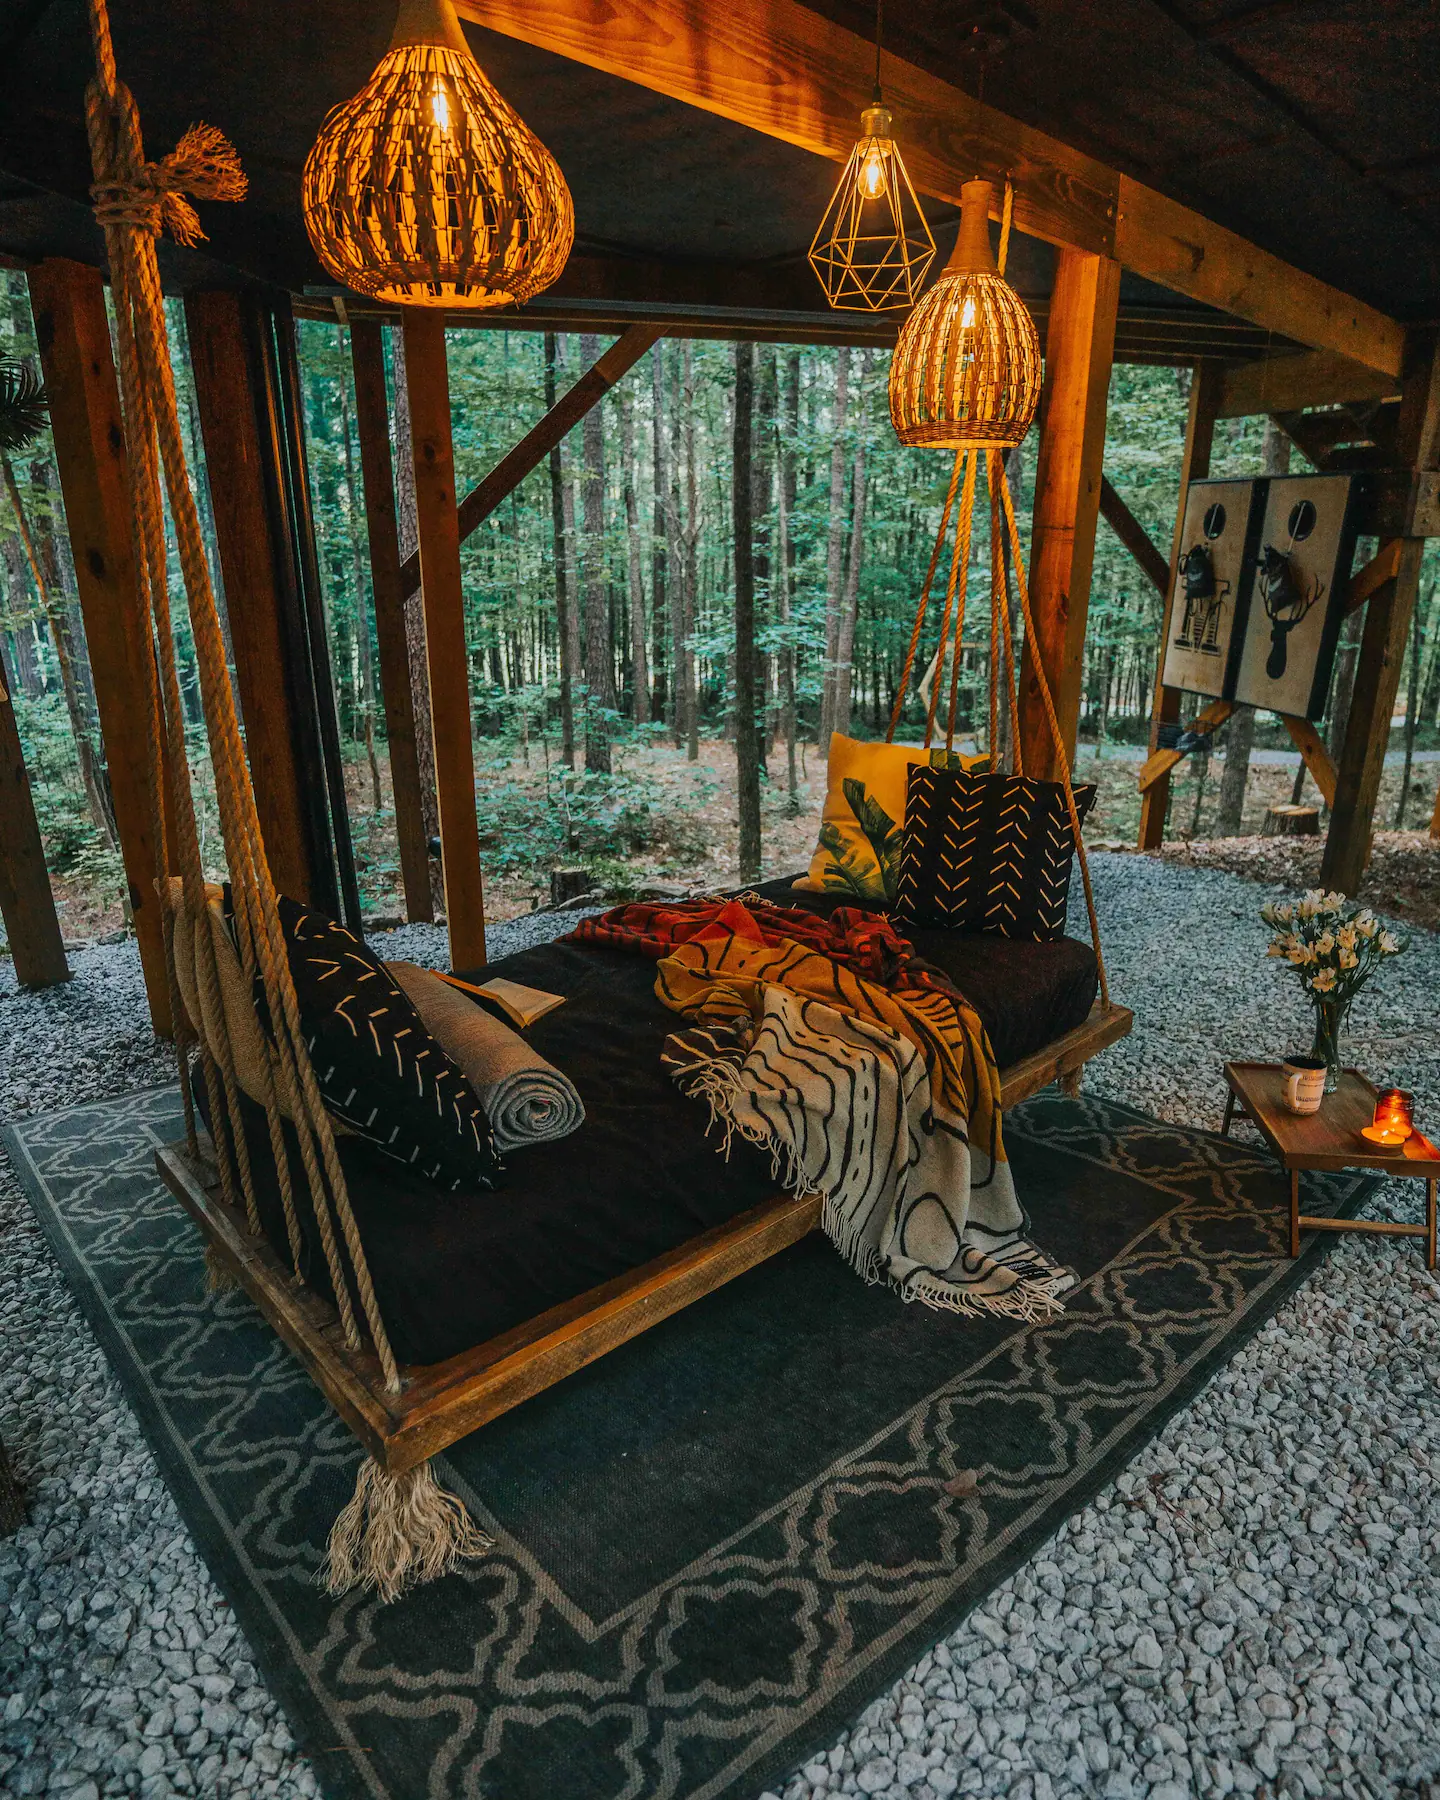 You can chill with your partner in this outdoor swinging bed.